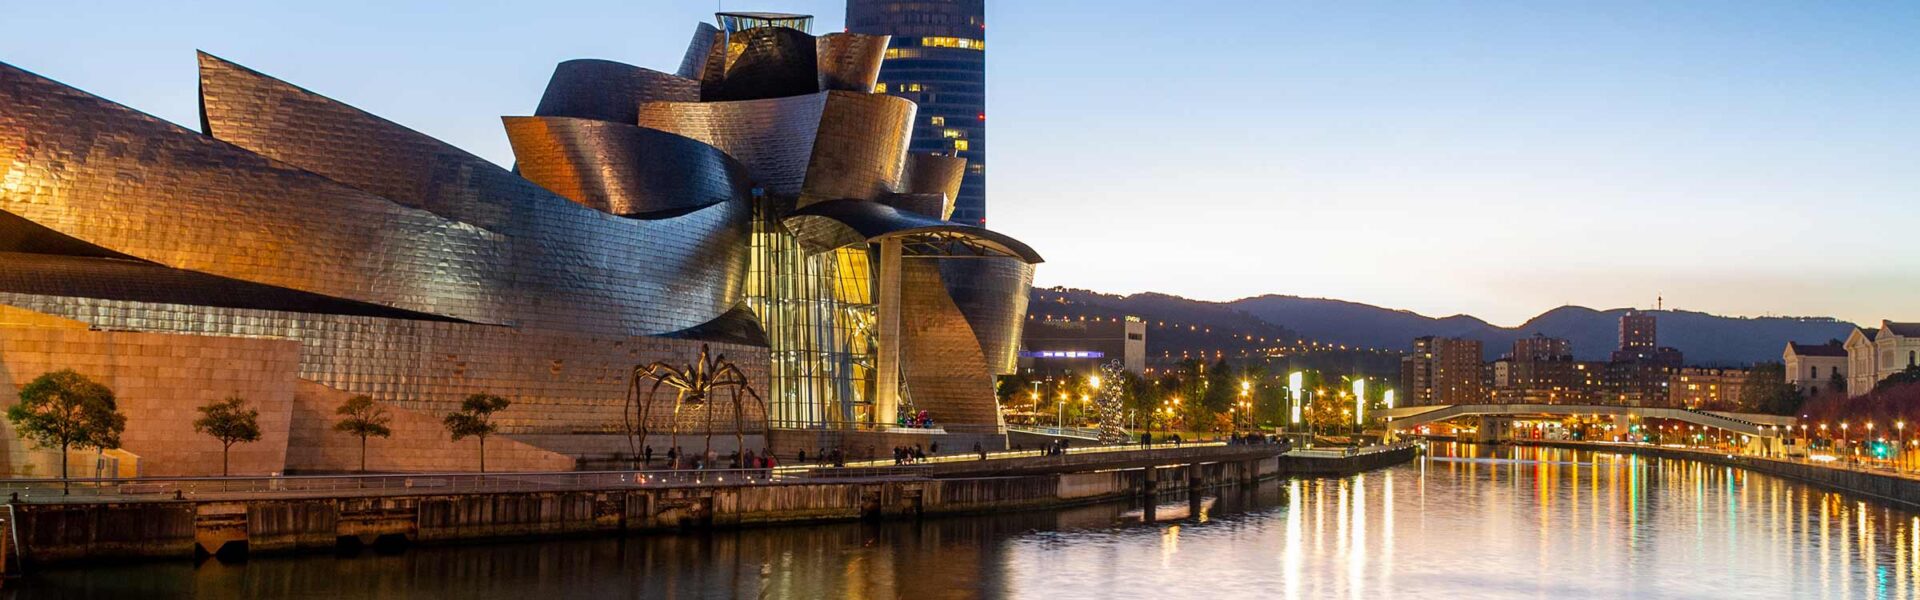 View in the evening along the river in Bilbao Spain, with the Guggenheim Museum featured.